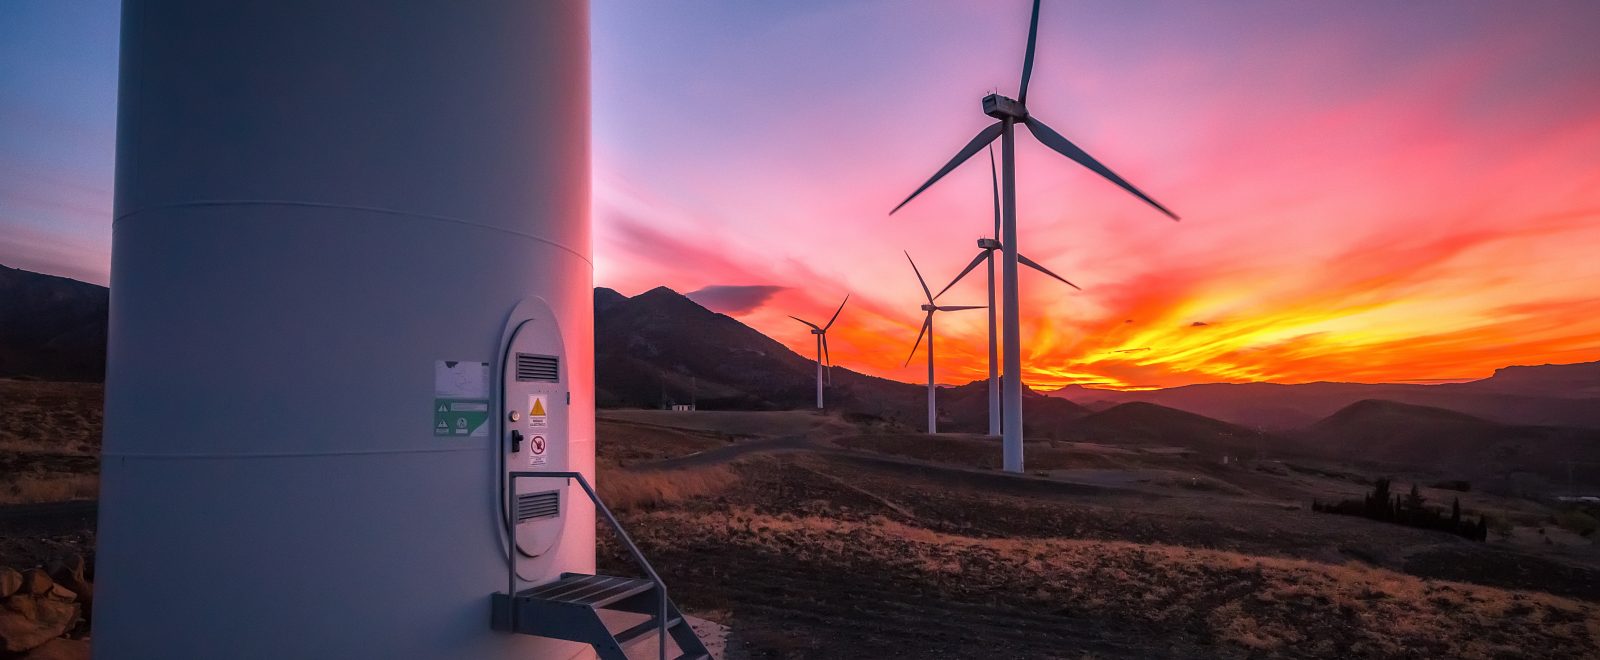 Colorful sunset with wind turbines